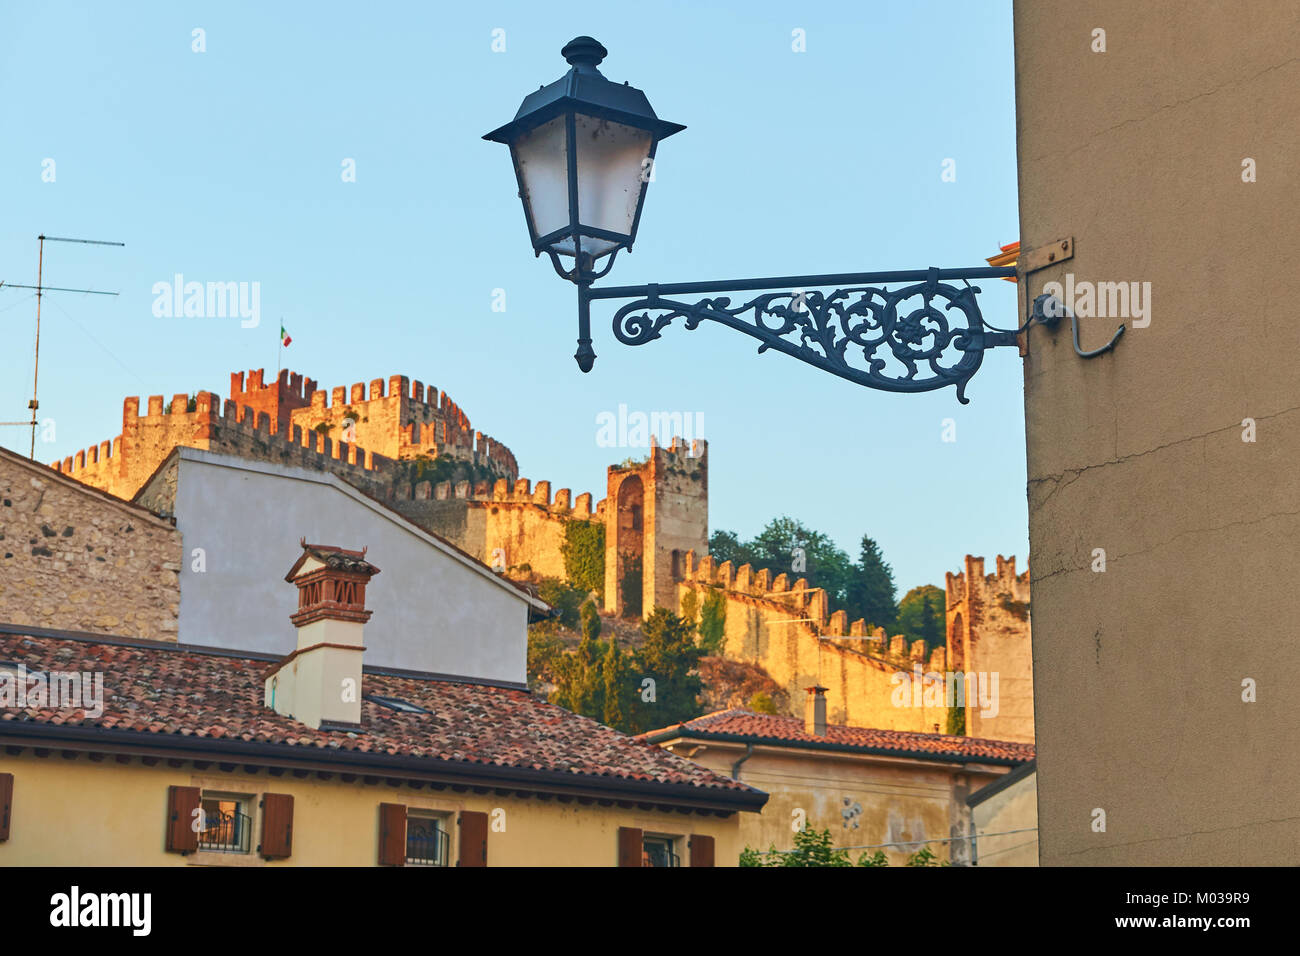 Picturesque roofs of beautiful medieval town of Soave Stock Photo